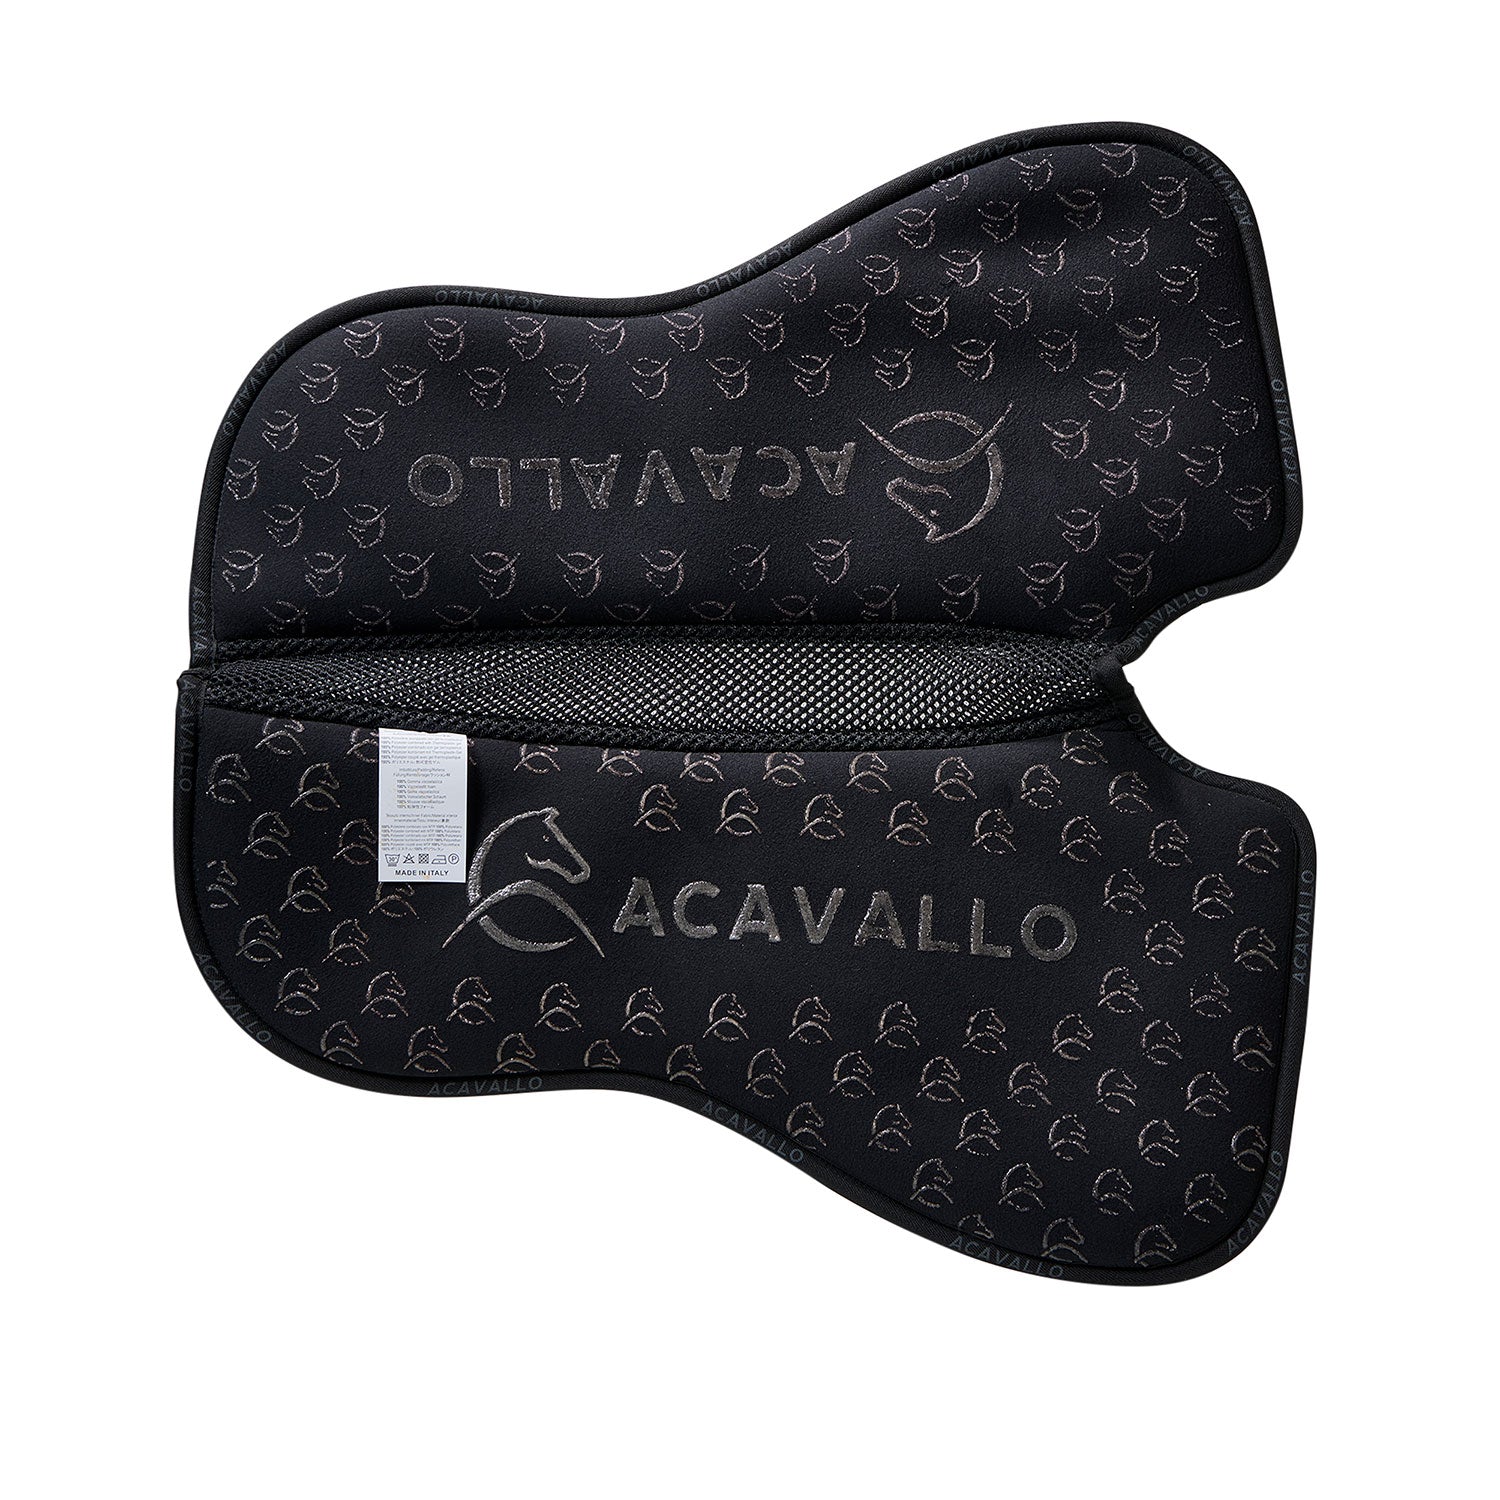 Acavallo double sided reversible pad